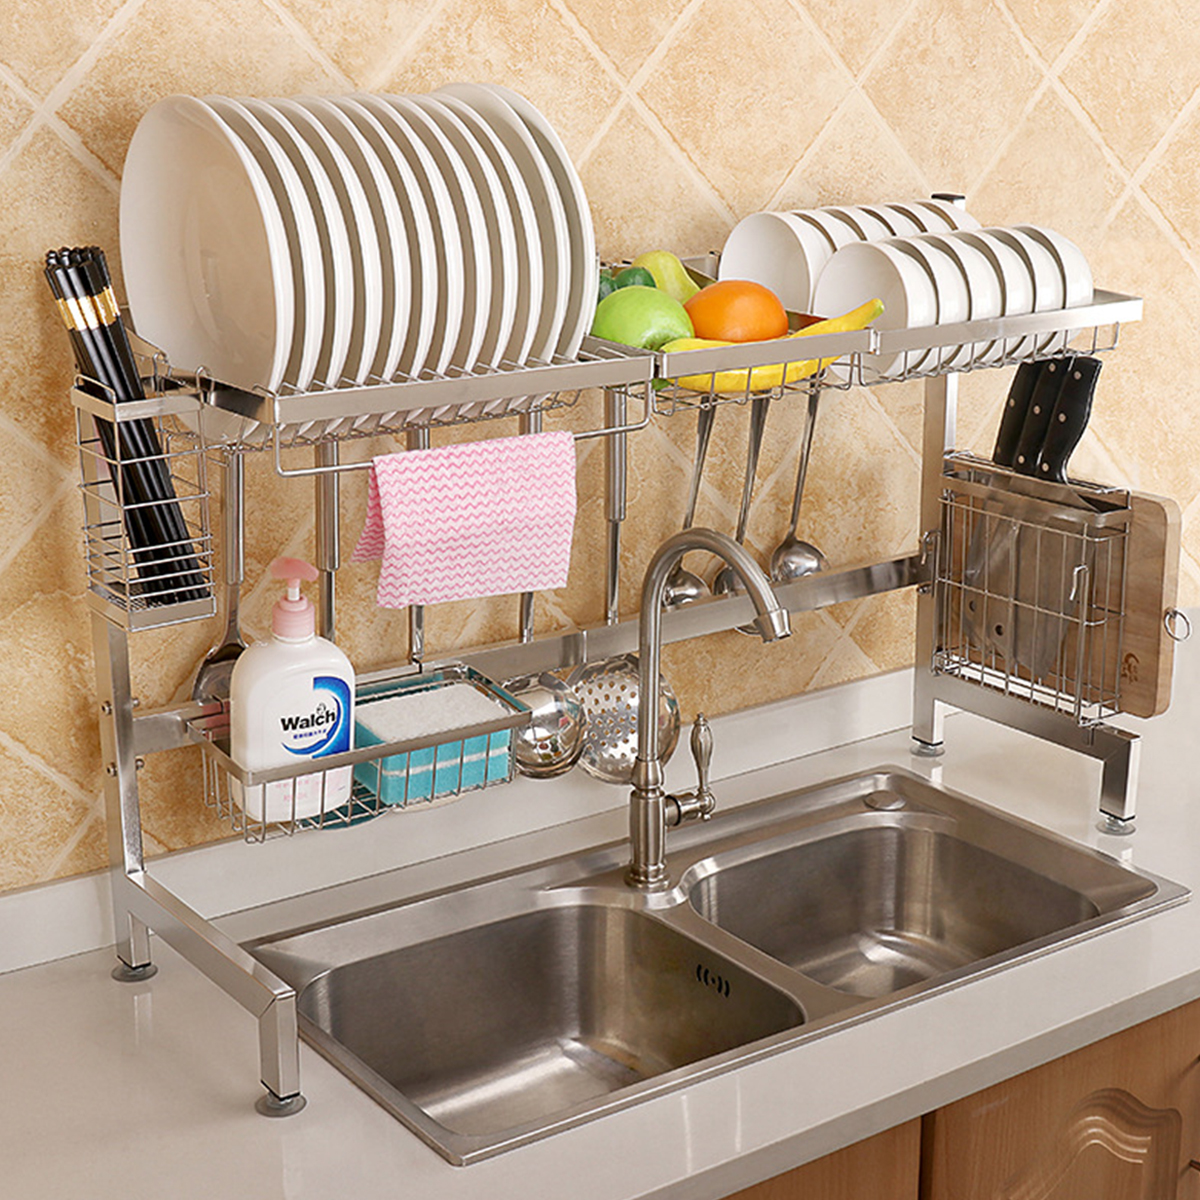 Parts & Accessories Kitchen Storage Dish Rack Drainer Drying Stainless Steel Tray Over Sink